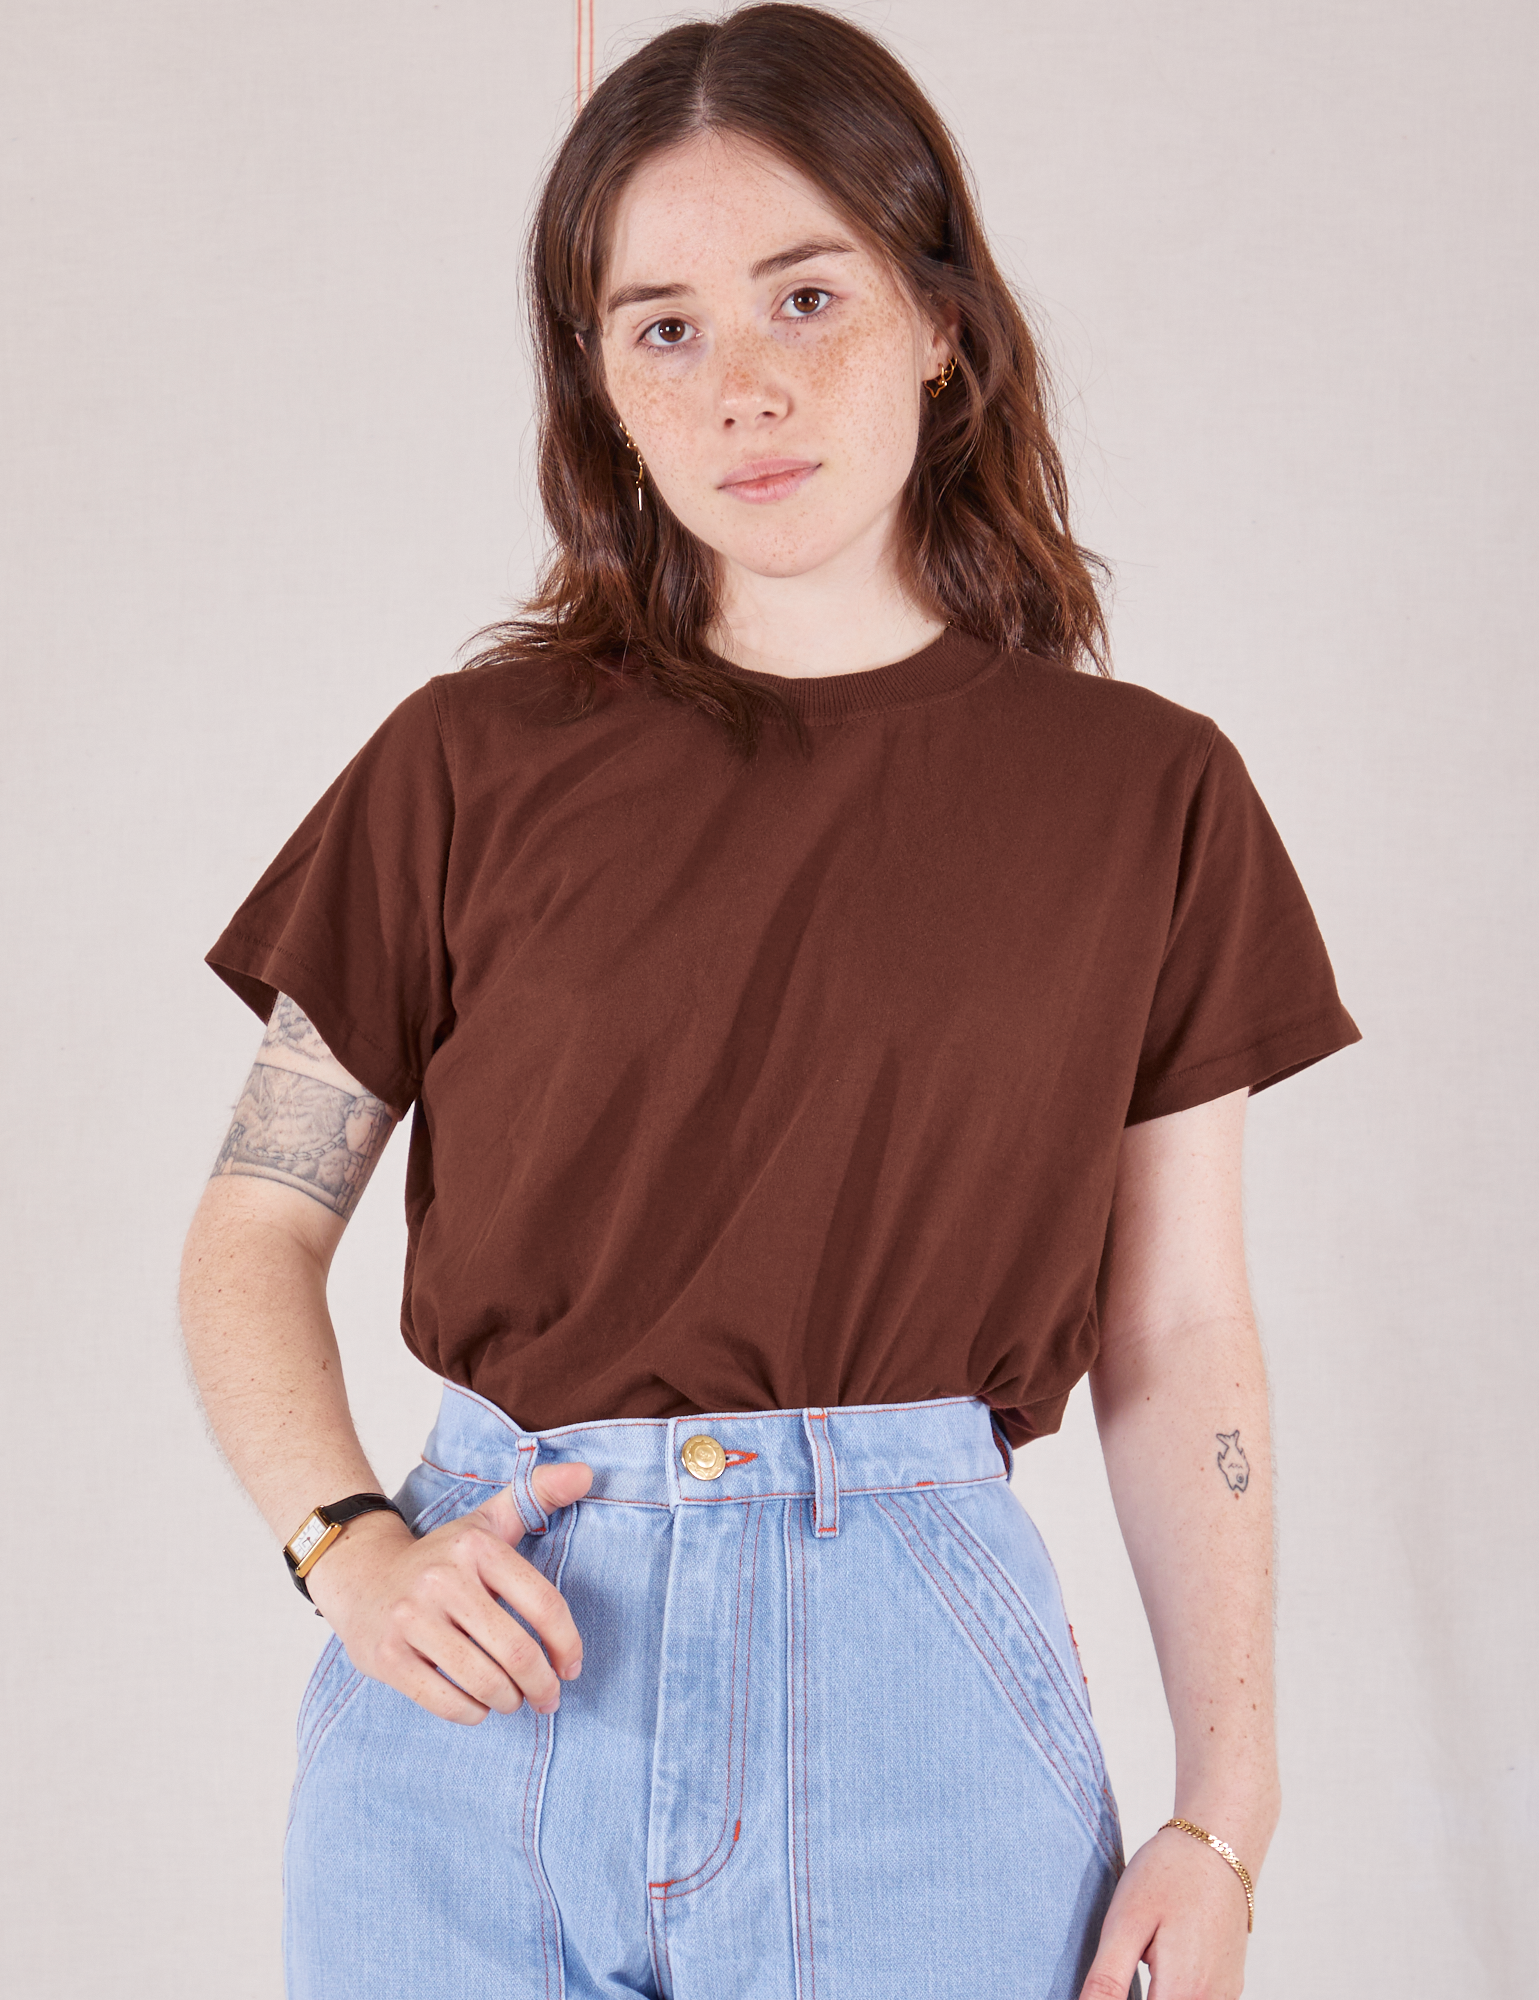 Hana is wearing Organic Vintage Tee in Fudgesicle Brown tucked into light wash Carpenter Jeans